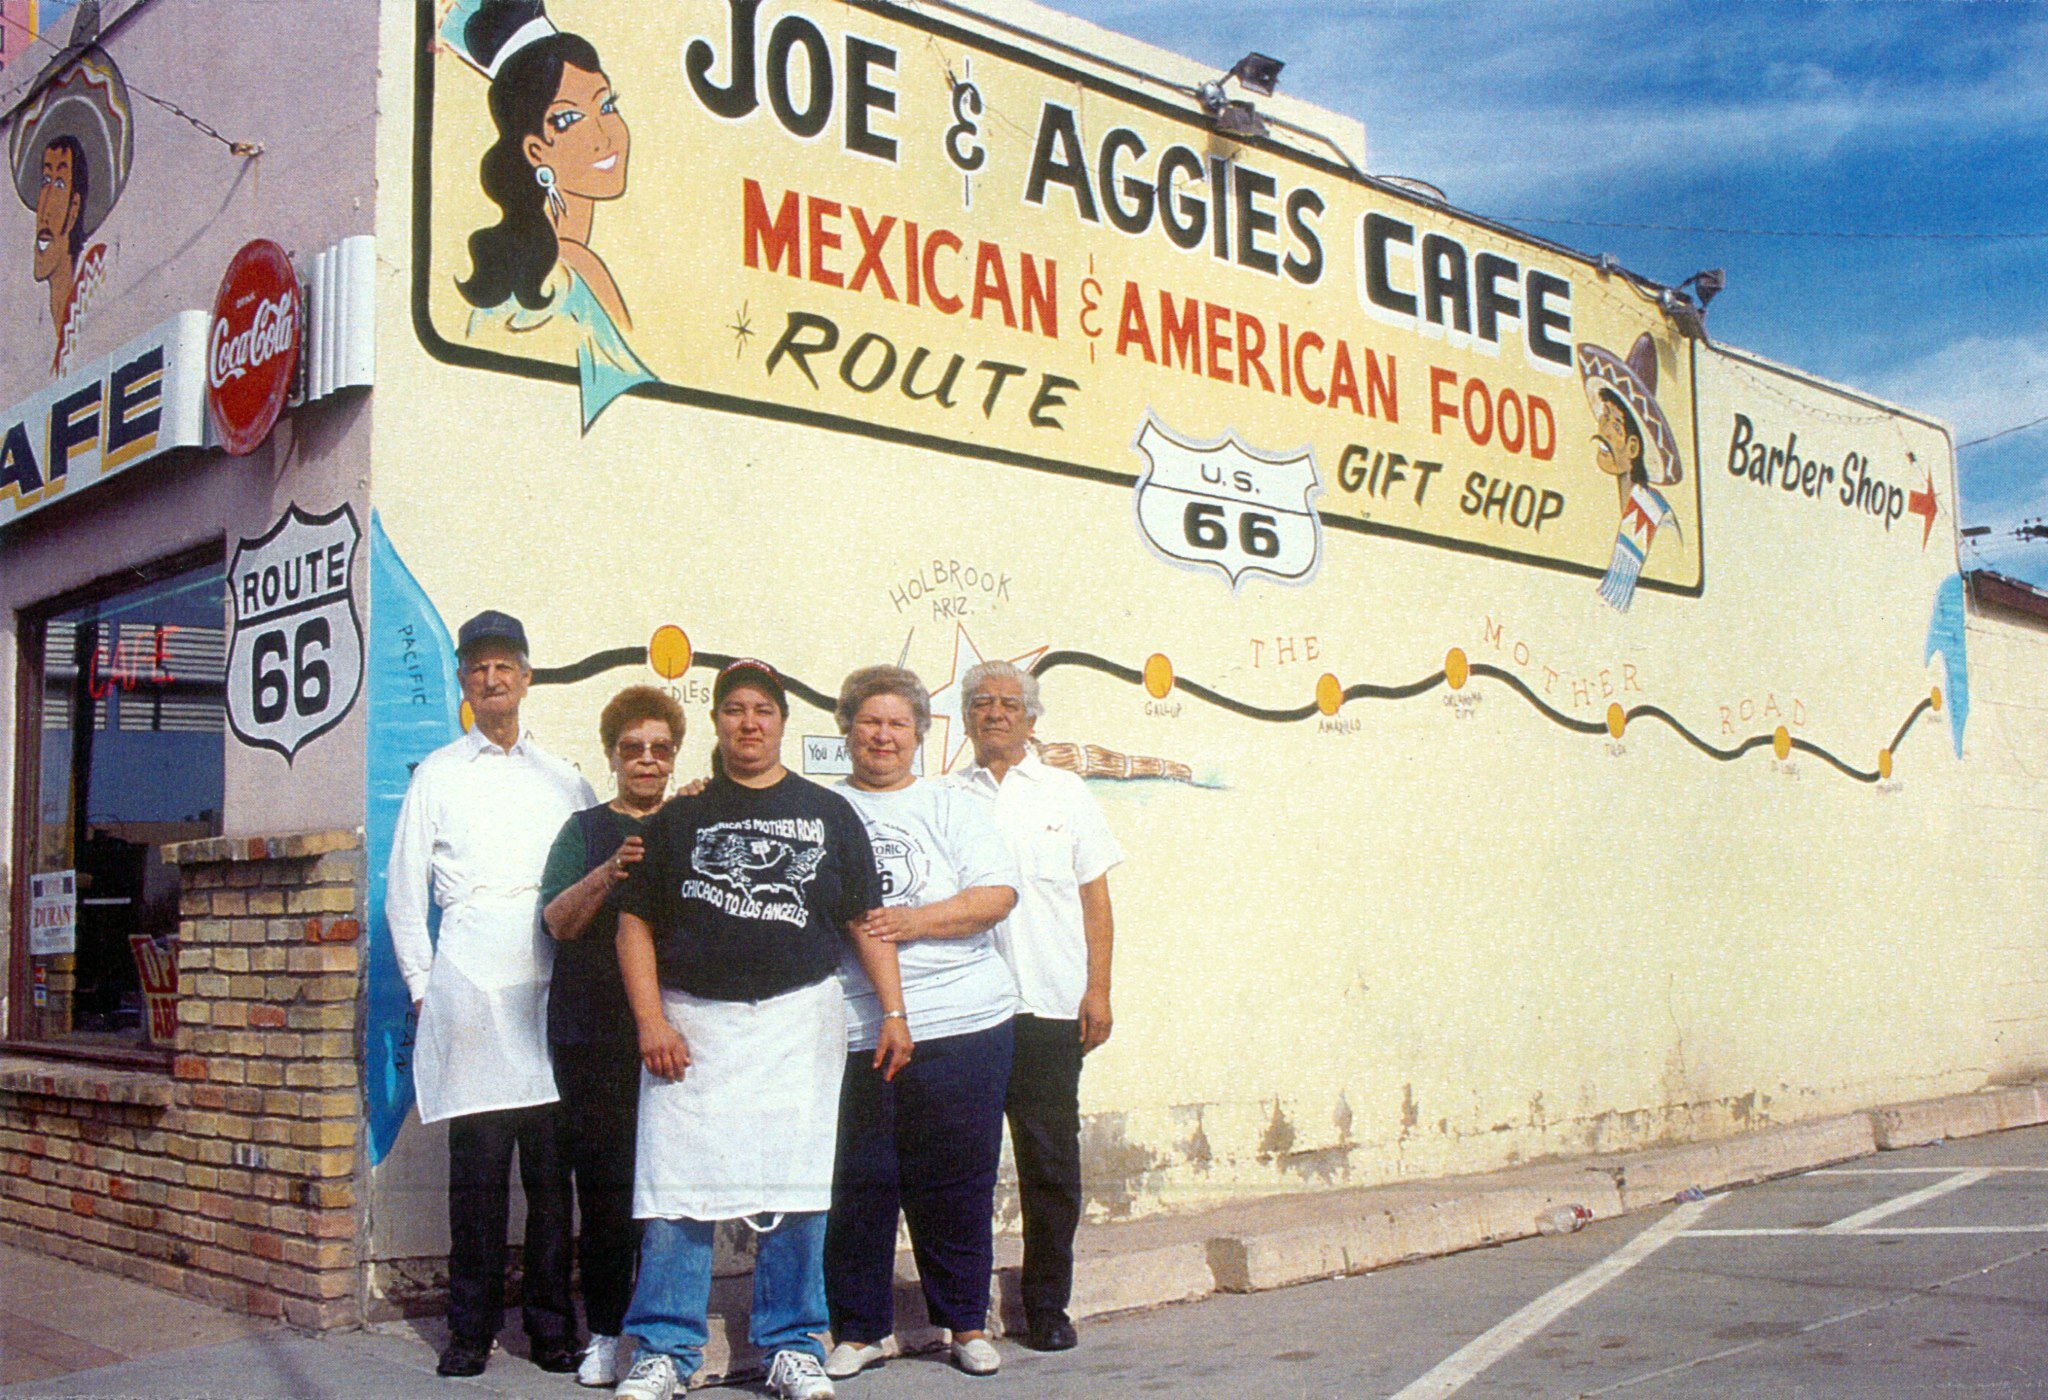  Joe and Aggie’s Cafe is a 3rd generation business in Holbrook, AZ. that inspired the Disney movie Cars. We were lucky enough to meet Joe and Aggie’s grandchildren, who run the cafe today. 